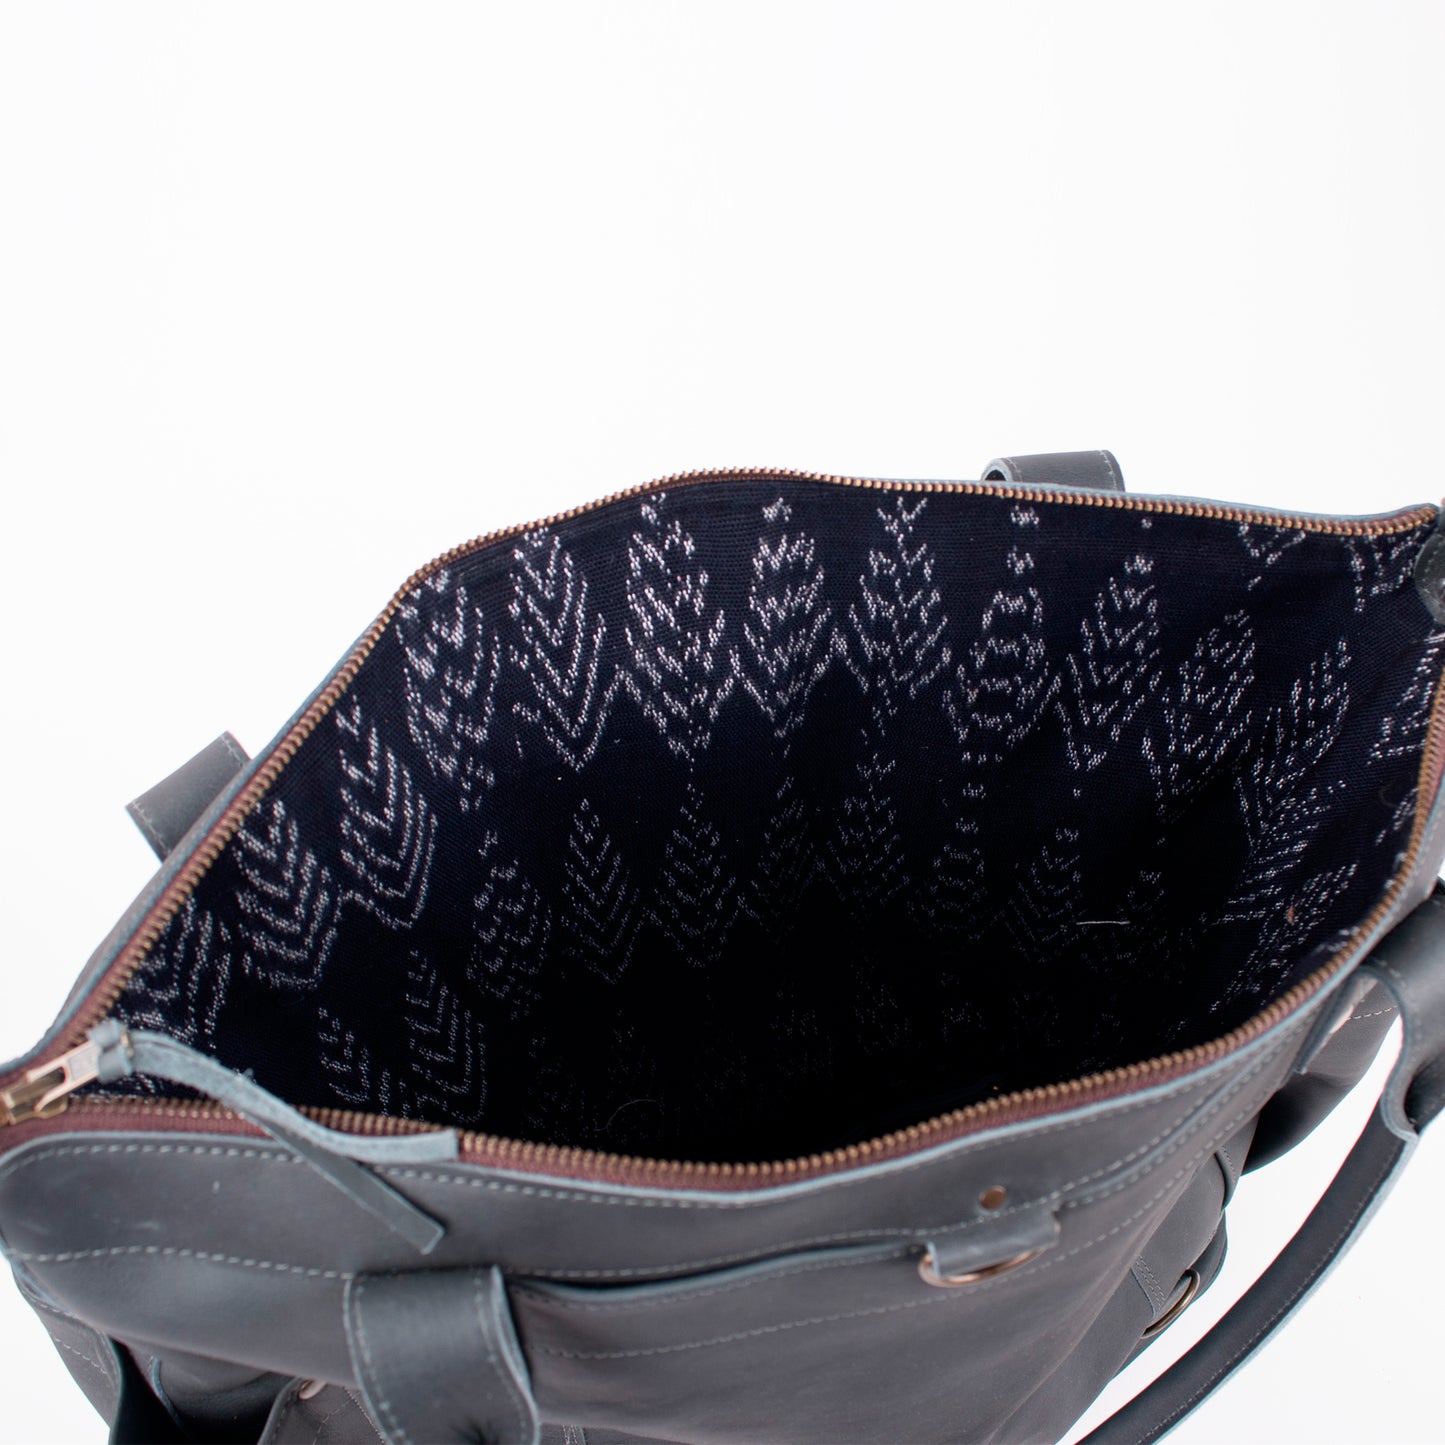 THE PERFECT BAG 2.0 - FULL LEATHER - SLATE